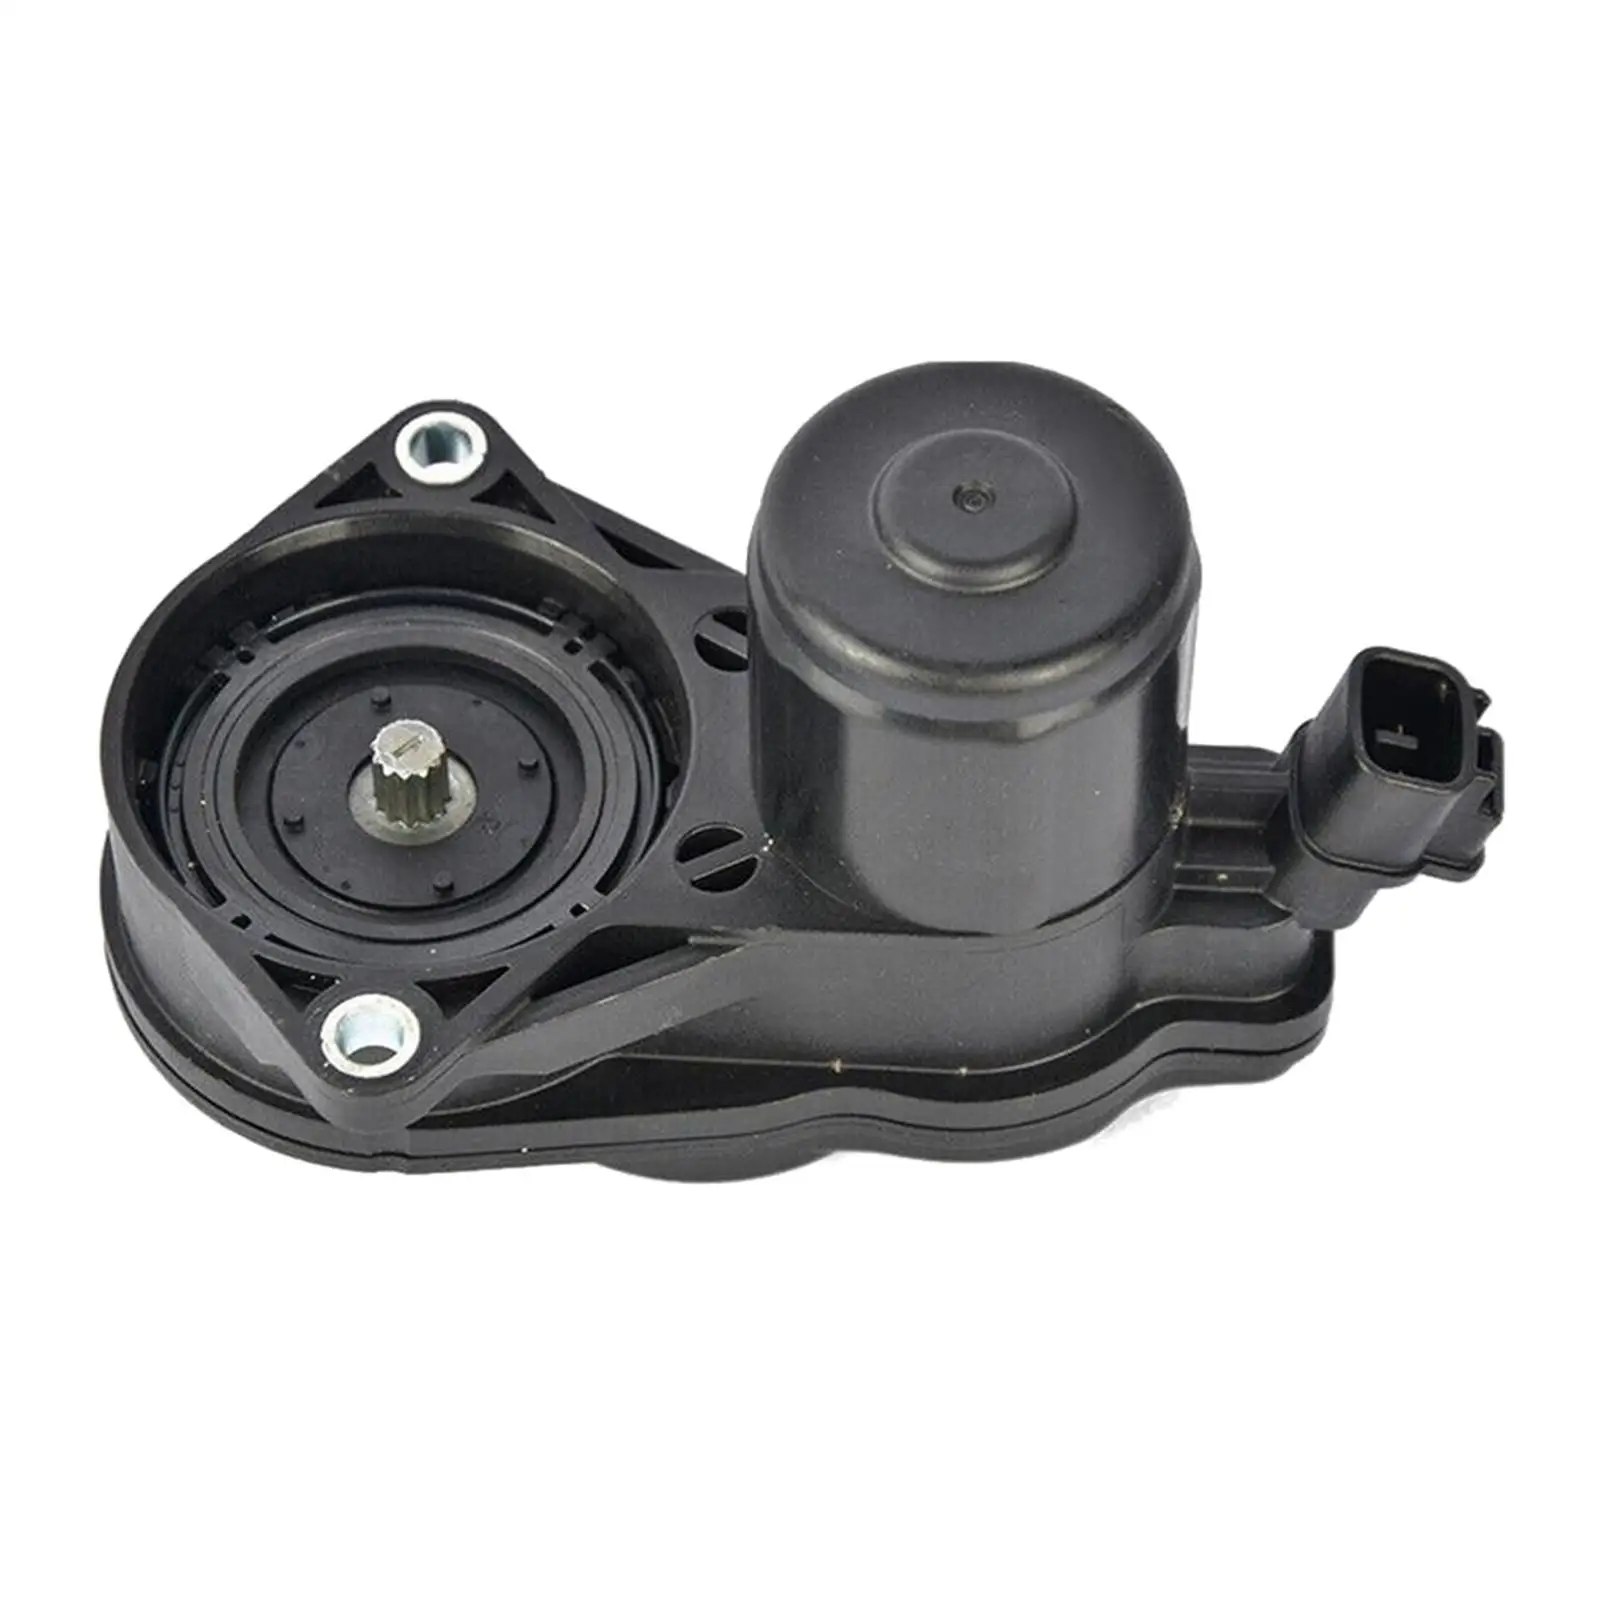 Parking Brake Actuator Assembly replacement for toyota Avalon Venza